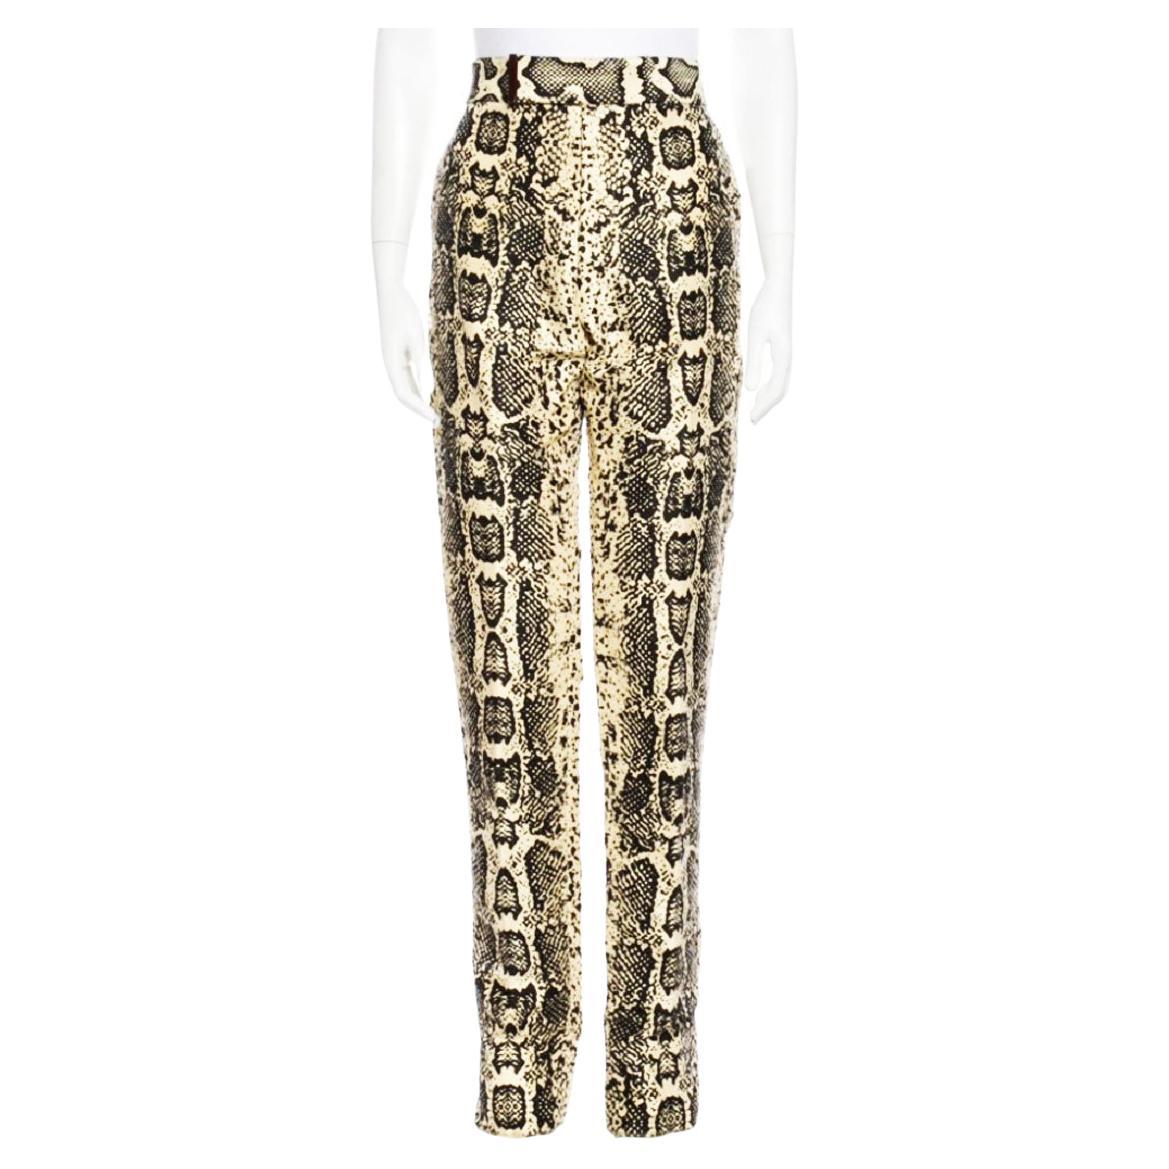 Tom Ford $4750 S/S 2021 Women's Snakeskin-Print Silk Pants Trousers 48 R For Sale